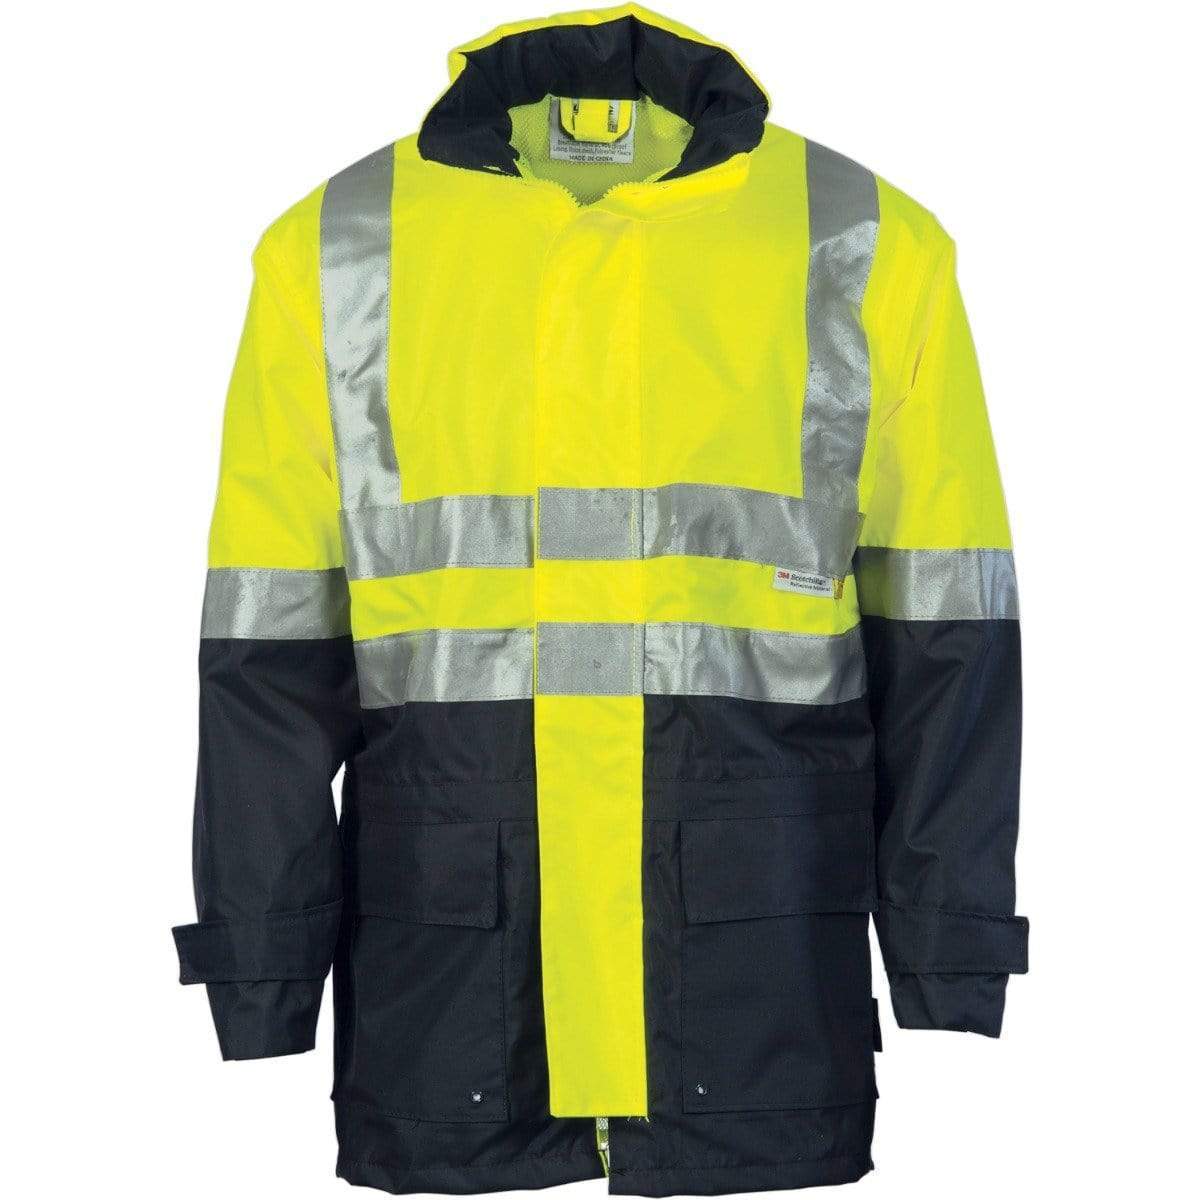 DNC Workwear Work Wear Yellow/Navy / 4XL DNC WORKWEAR Hi-Vis Two Tone Breathable Rain Jacket with 3M Reflective Tape 3867